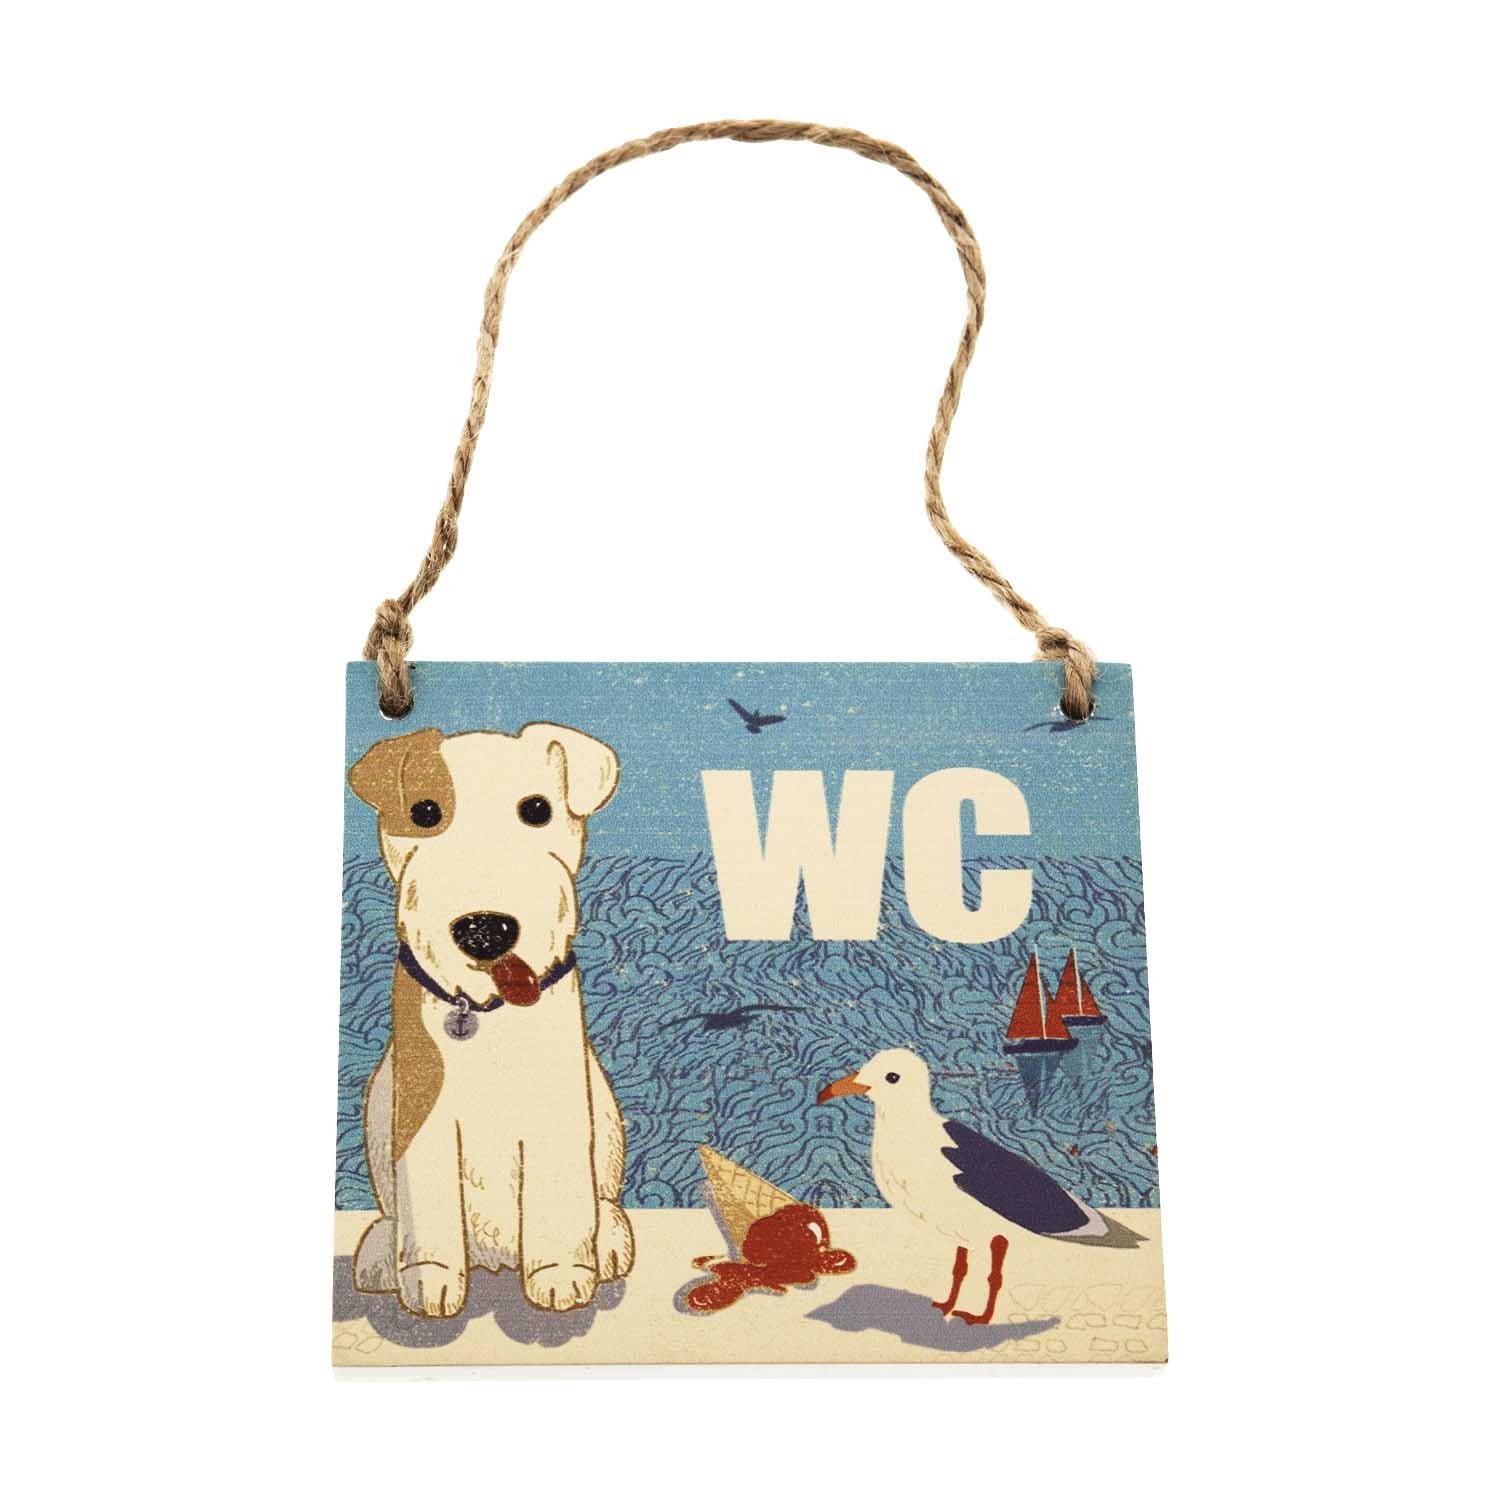 Dog Lover Gifts available at Dog Krazy Gifts – Jill White Rocket68 Ahoy WC Sign available at www.dogkrazygifts.co.uk